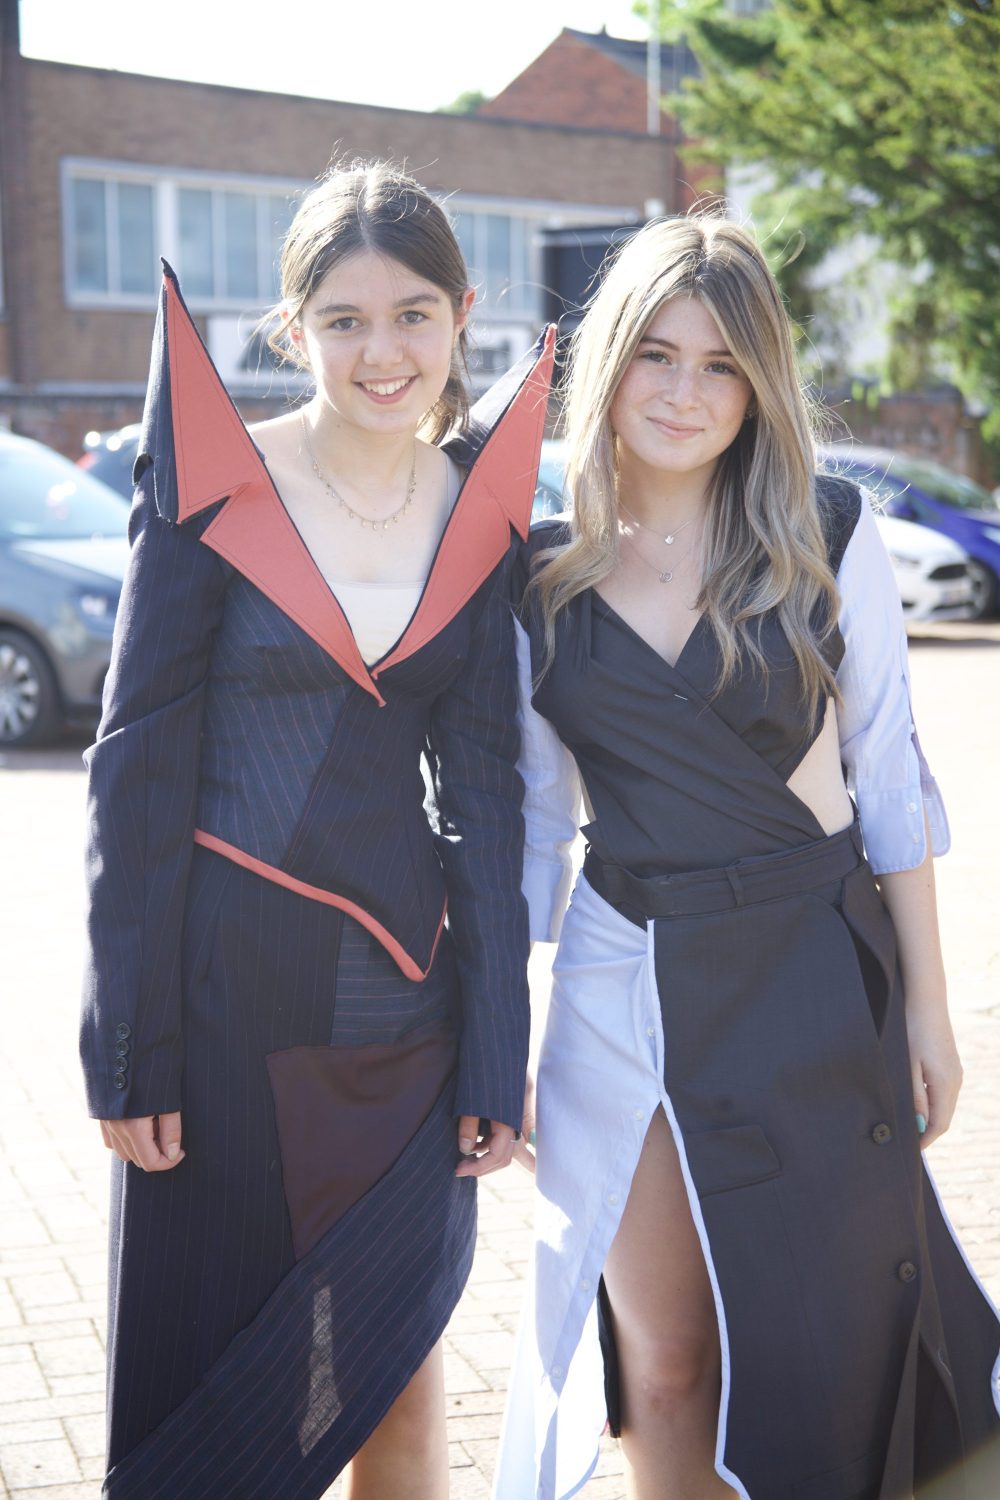 RGS Talent on show at The Creative Arts Festival - Fashion